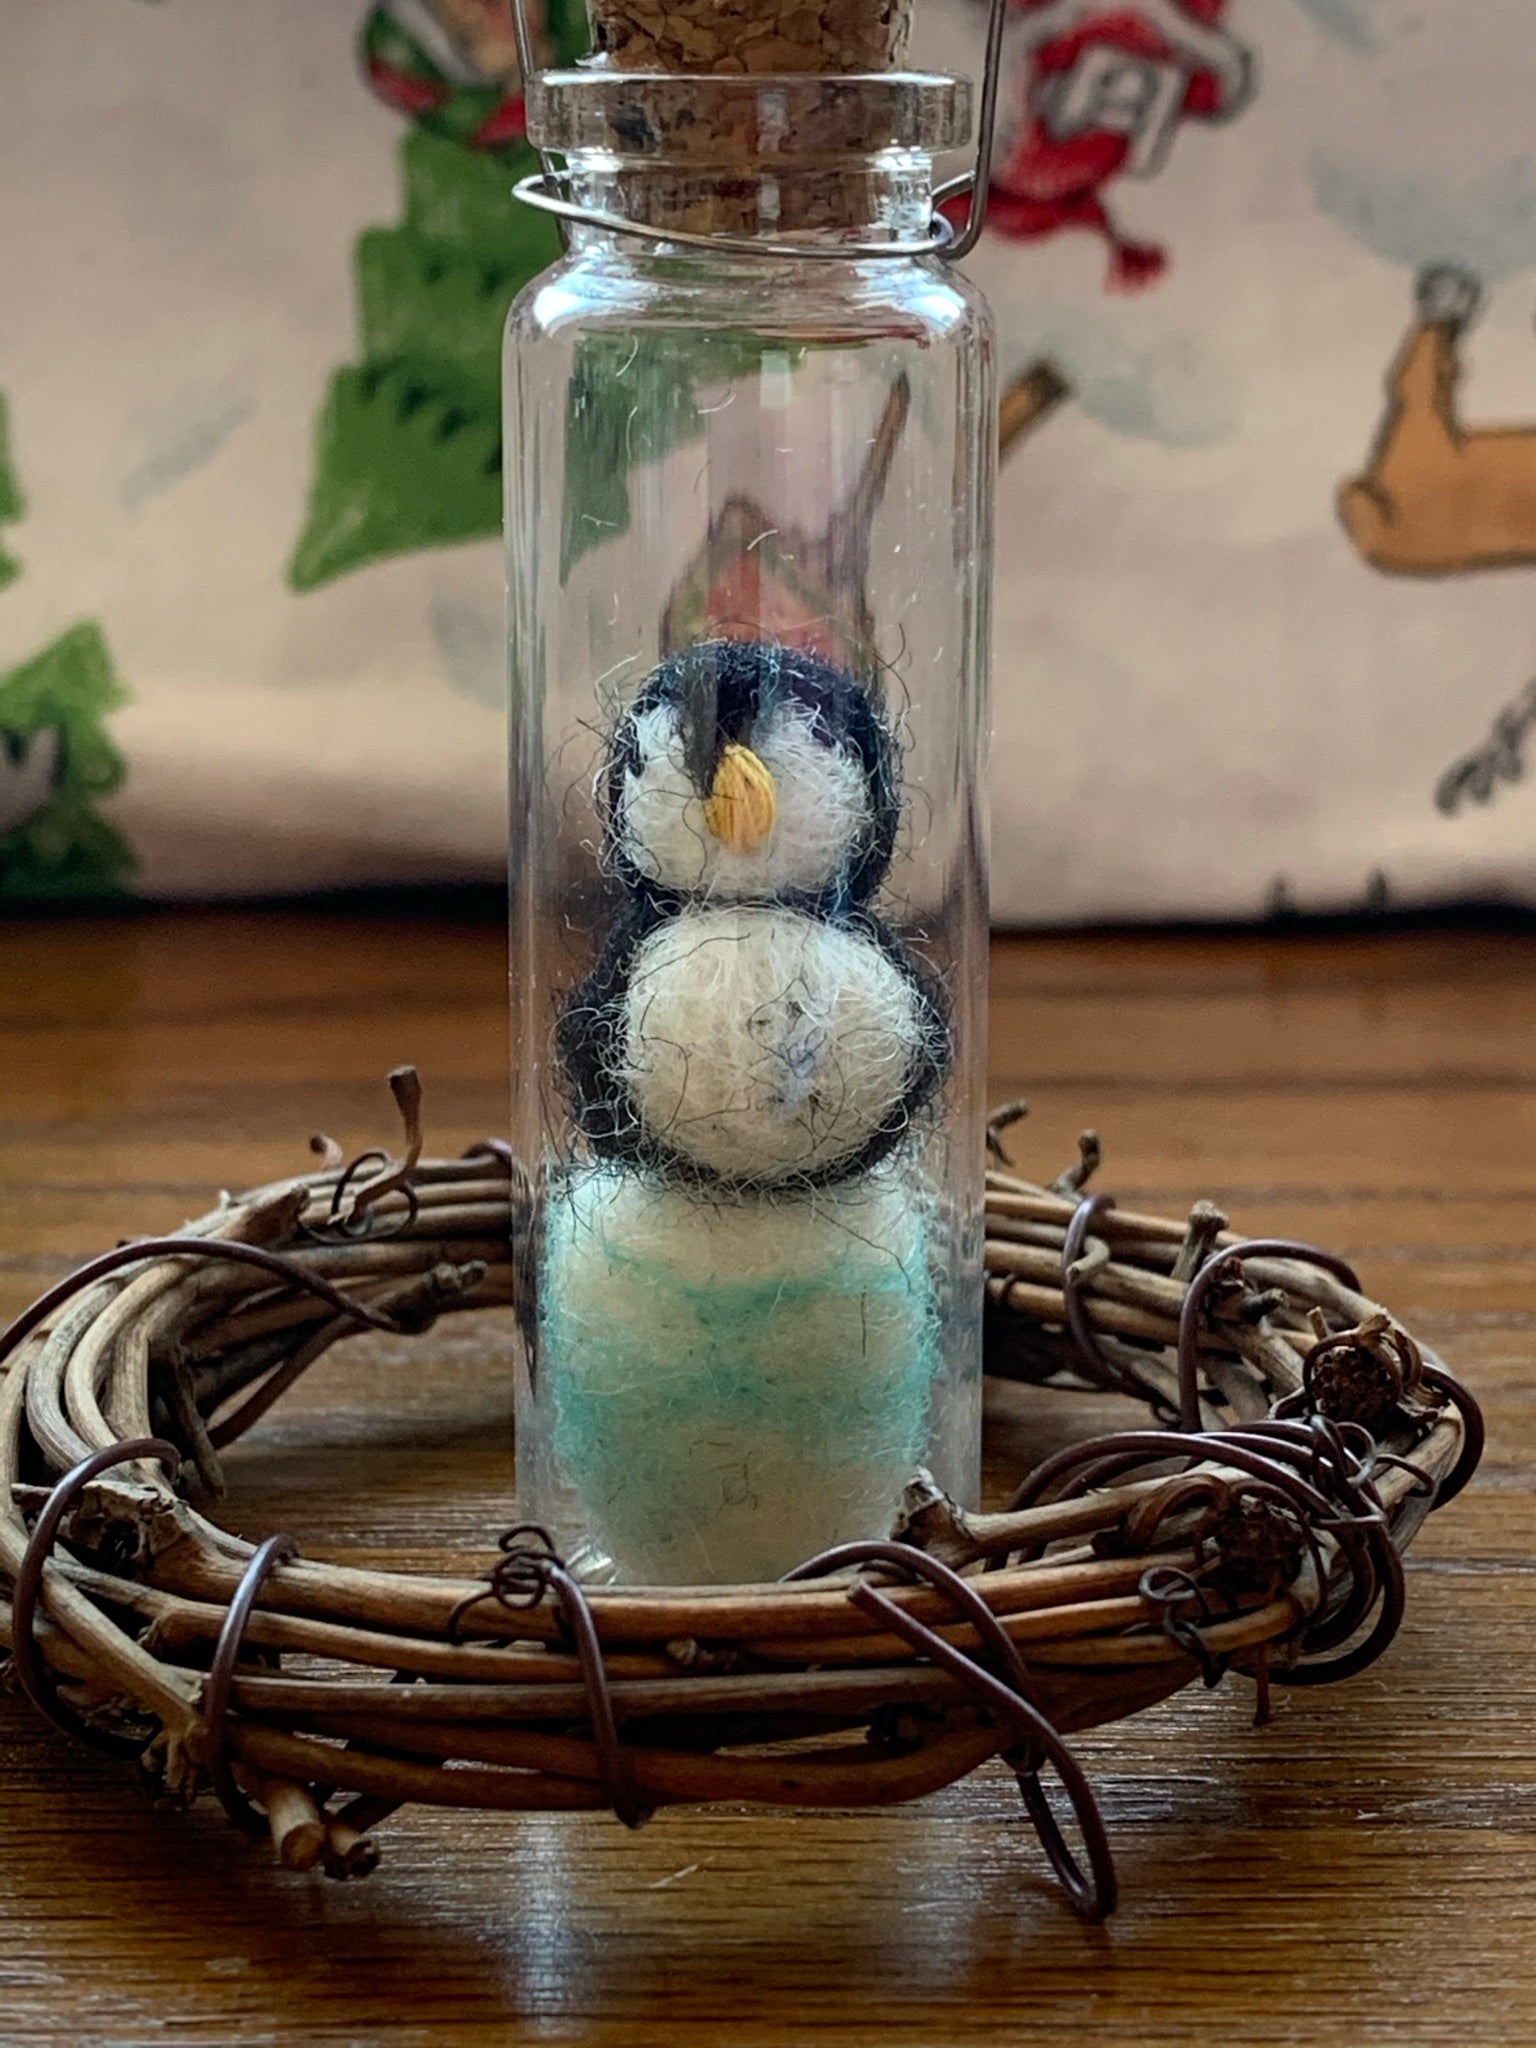 This is a close-up photo of the penguin bottle ornament that is handcrafted and the penguin inside the bottle is made of 100% natural hand-felted wool. The penguin is black and white and sits atop a blue and white iceberg. He is enclosed in a small, glass, corked apothecary bottle which is affixed with a metal wire to hang it on your tree , but you can also place it on a shelf or table top. Approximately 3"x1" (it is 6.75" if you include the wire hanger). It comes with a fair trade home and and garden tag.